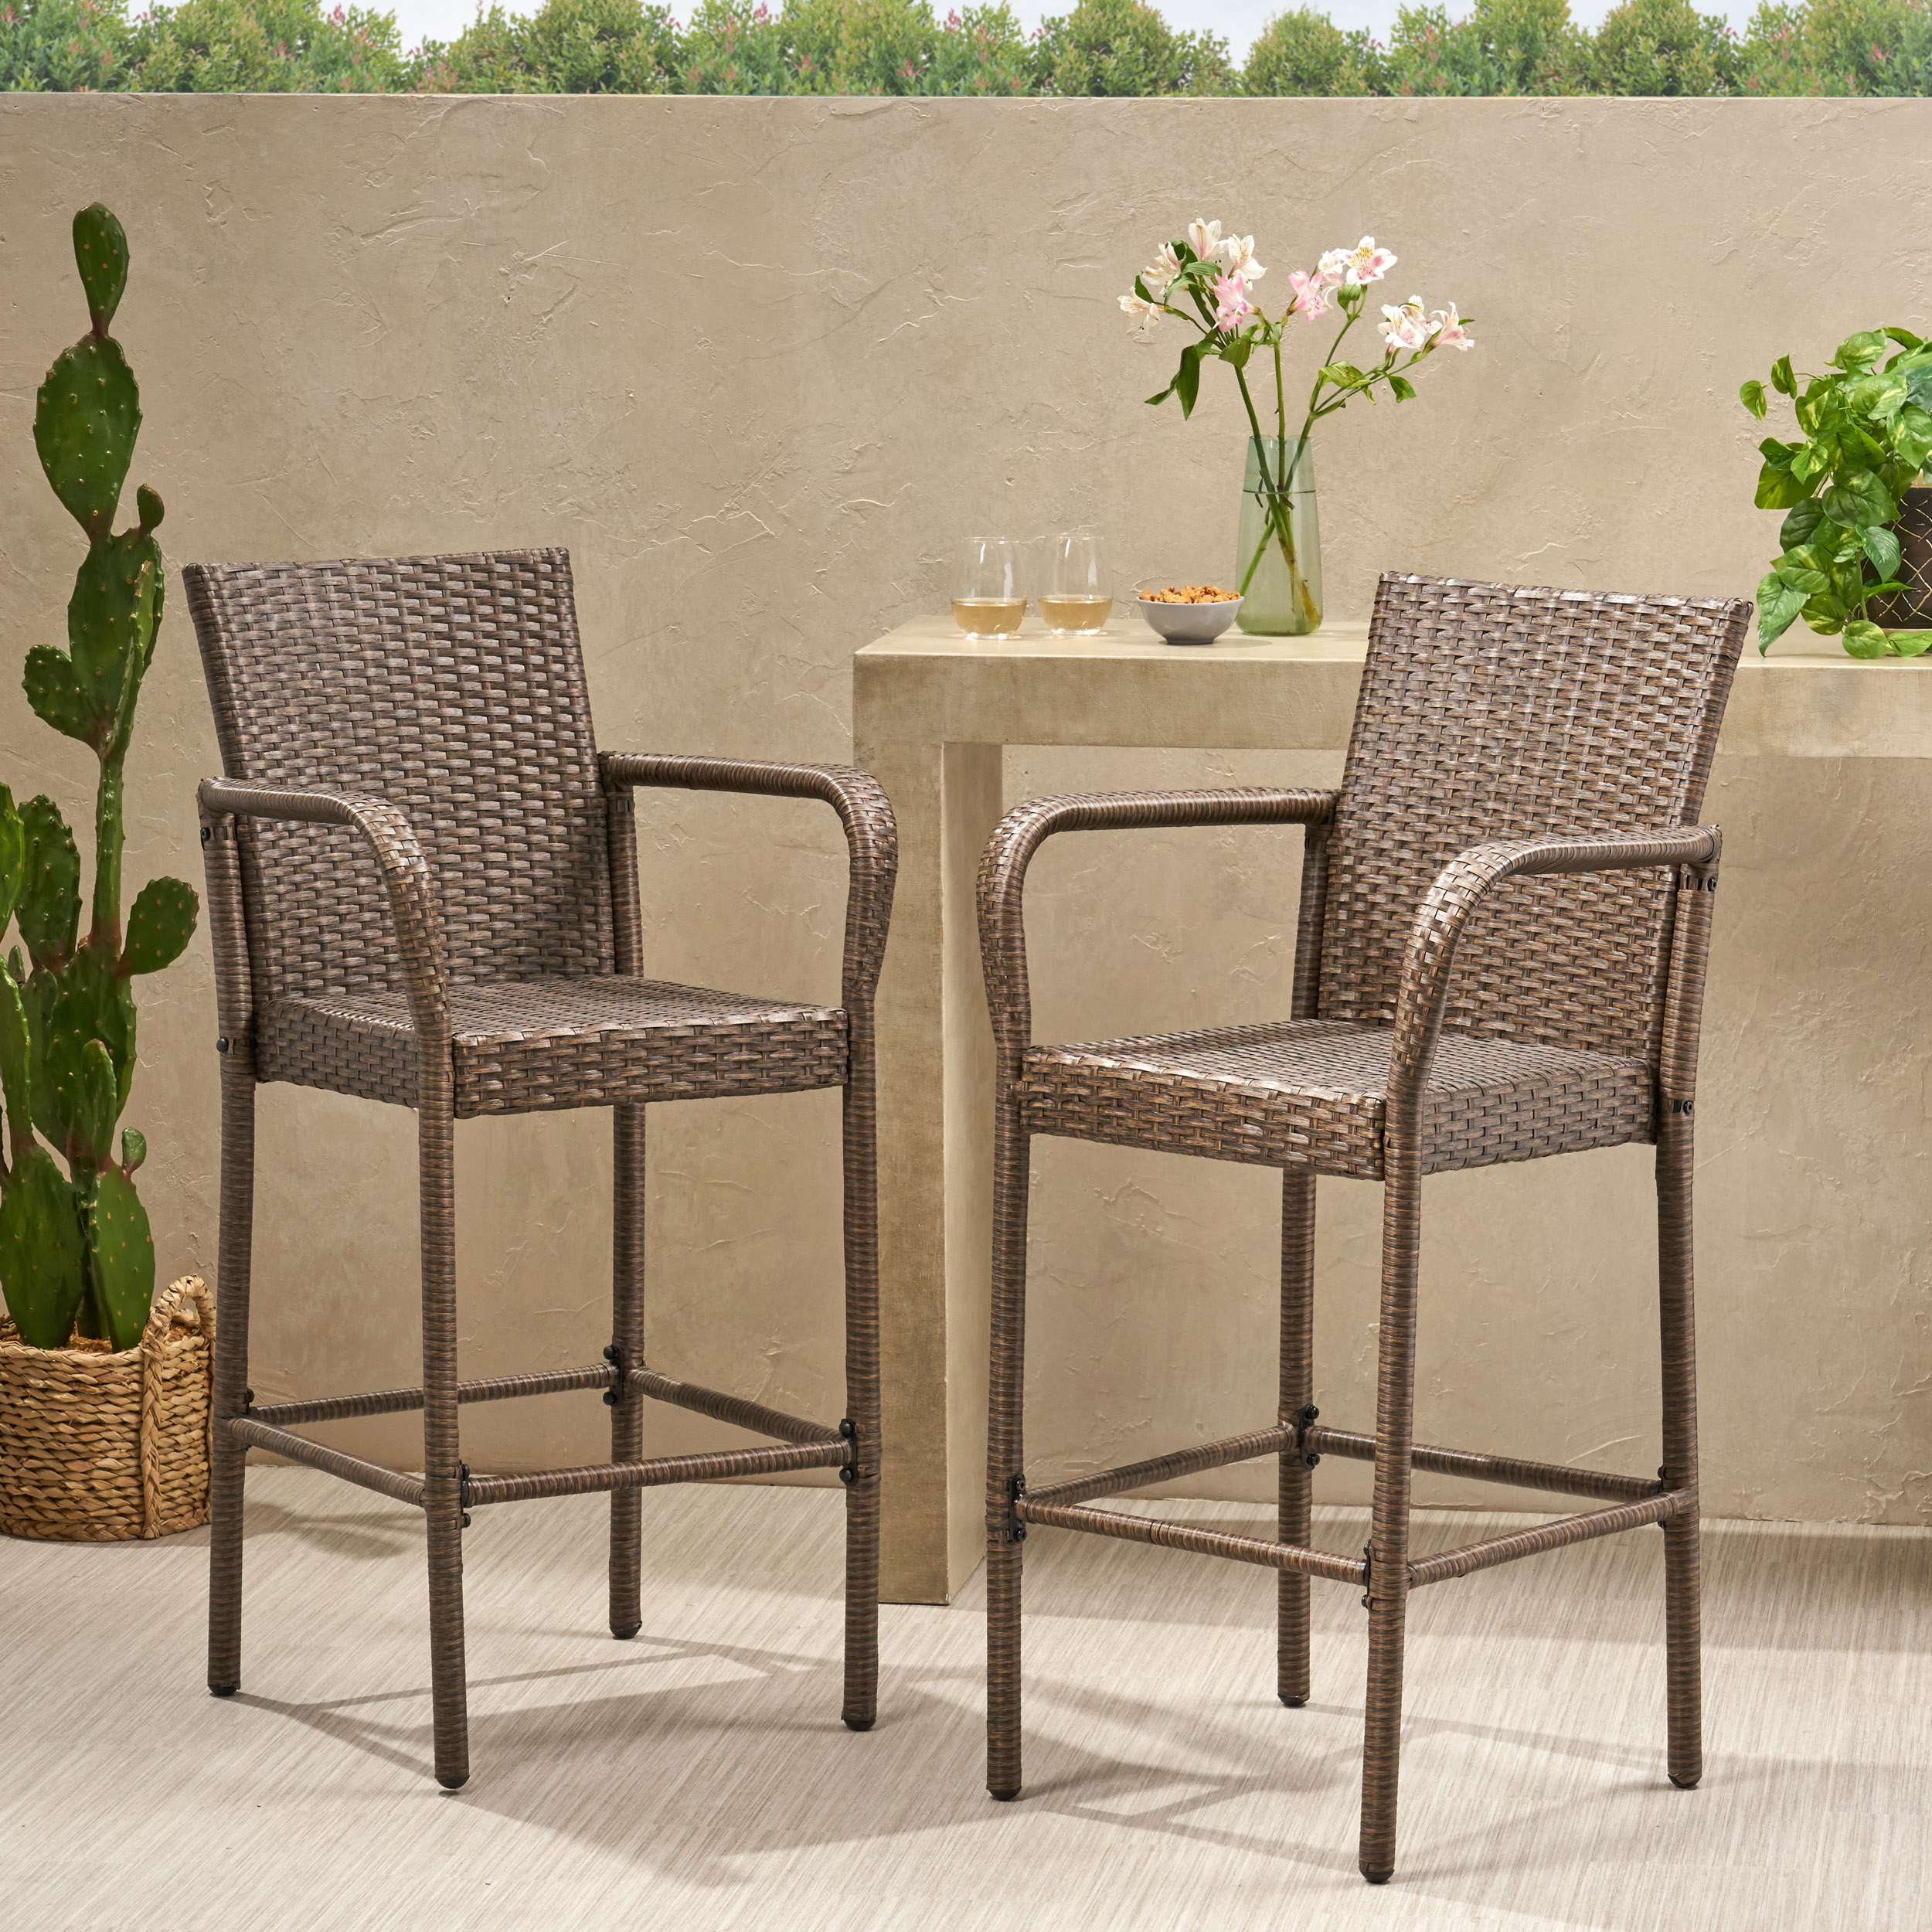 Conquista 30-Inch Outdoor Mix Mocha Wicker Barstool - Brown, Set Of 2